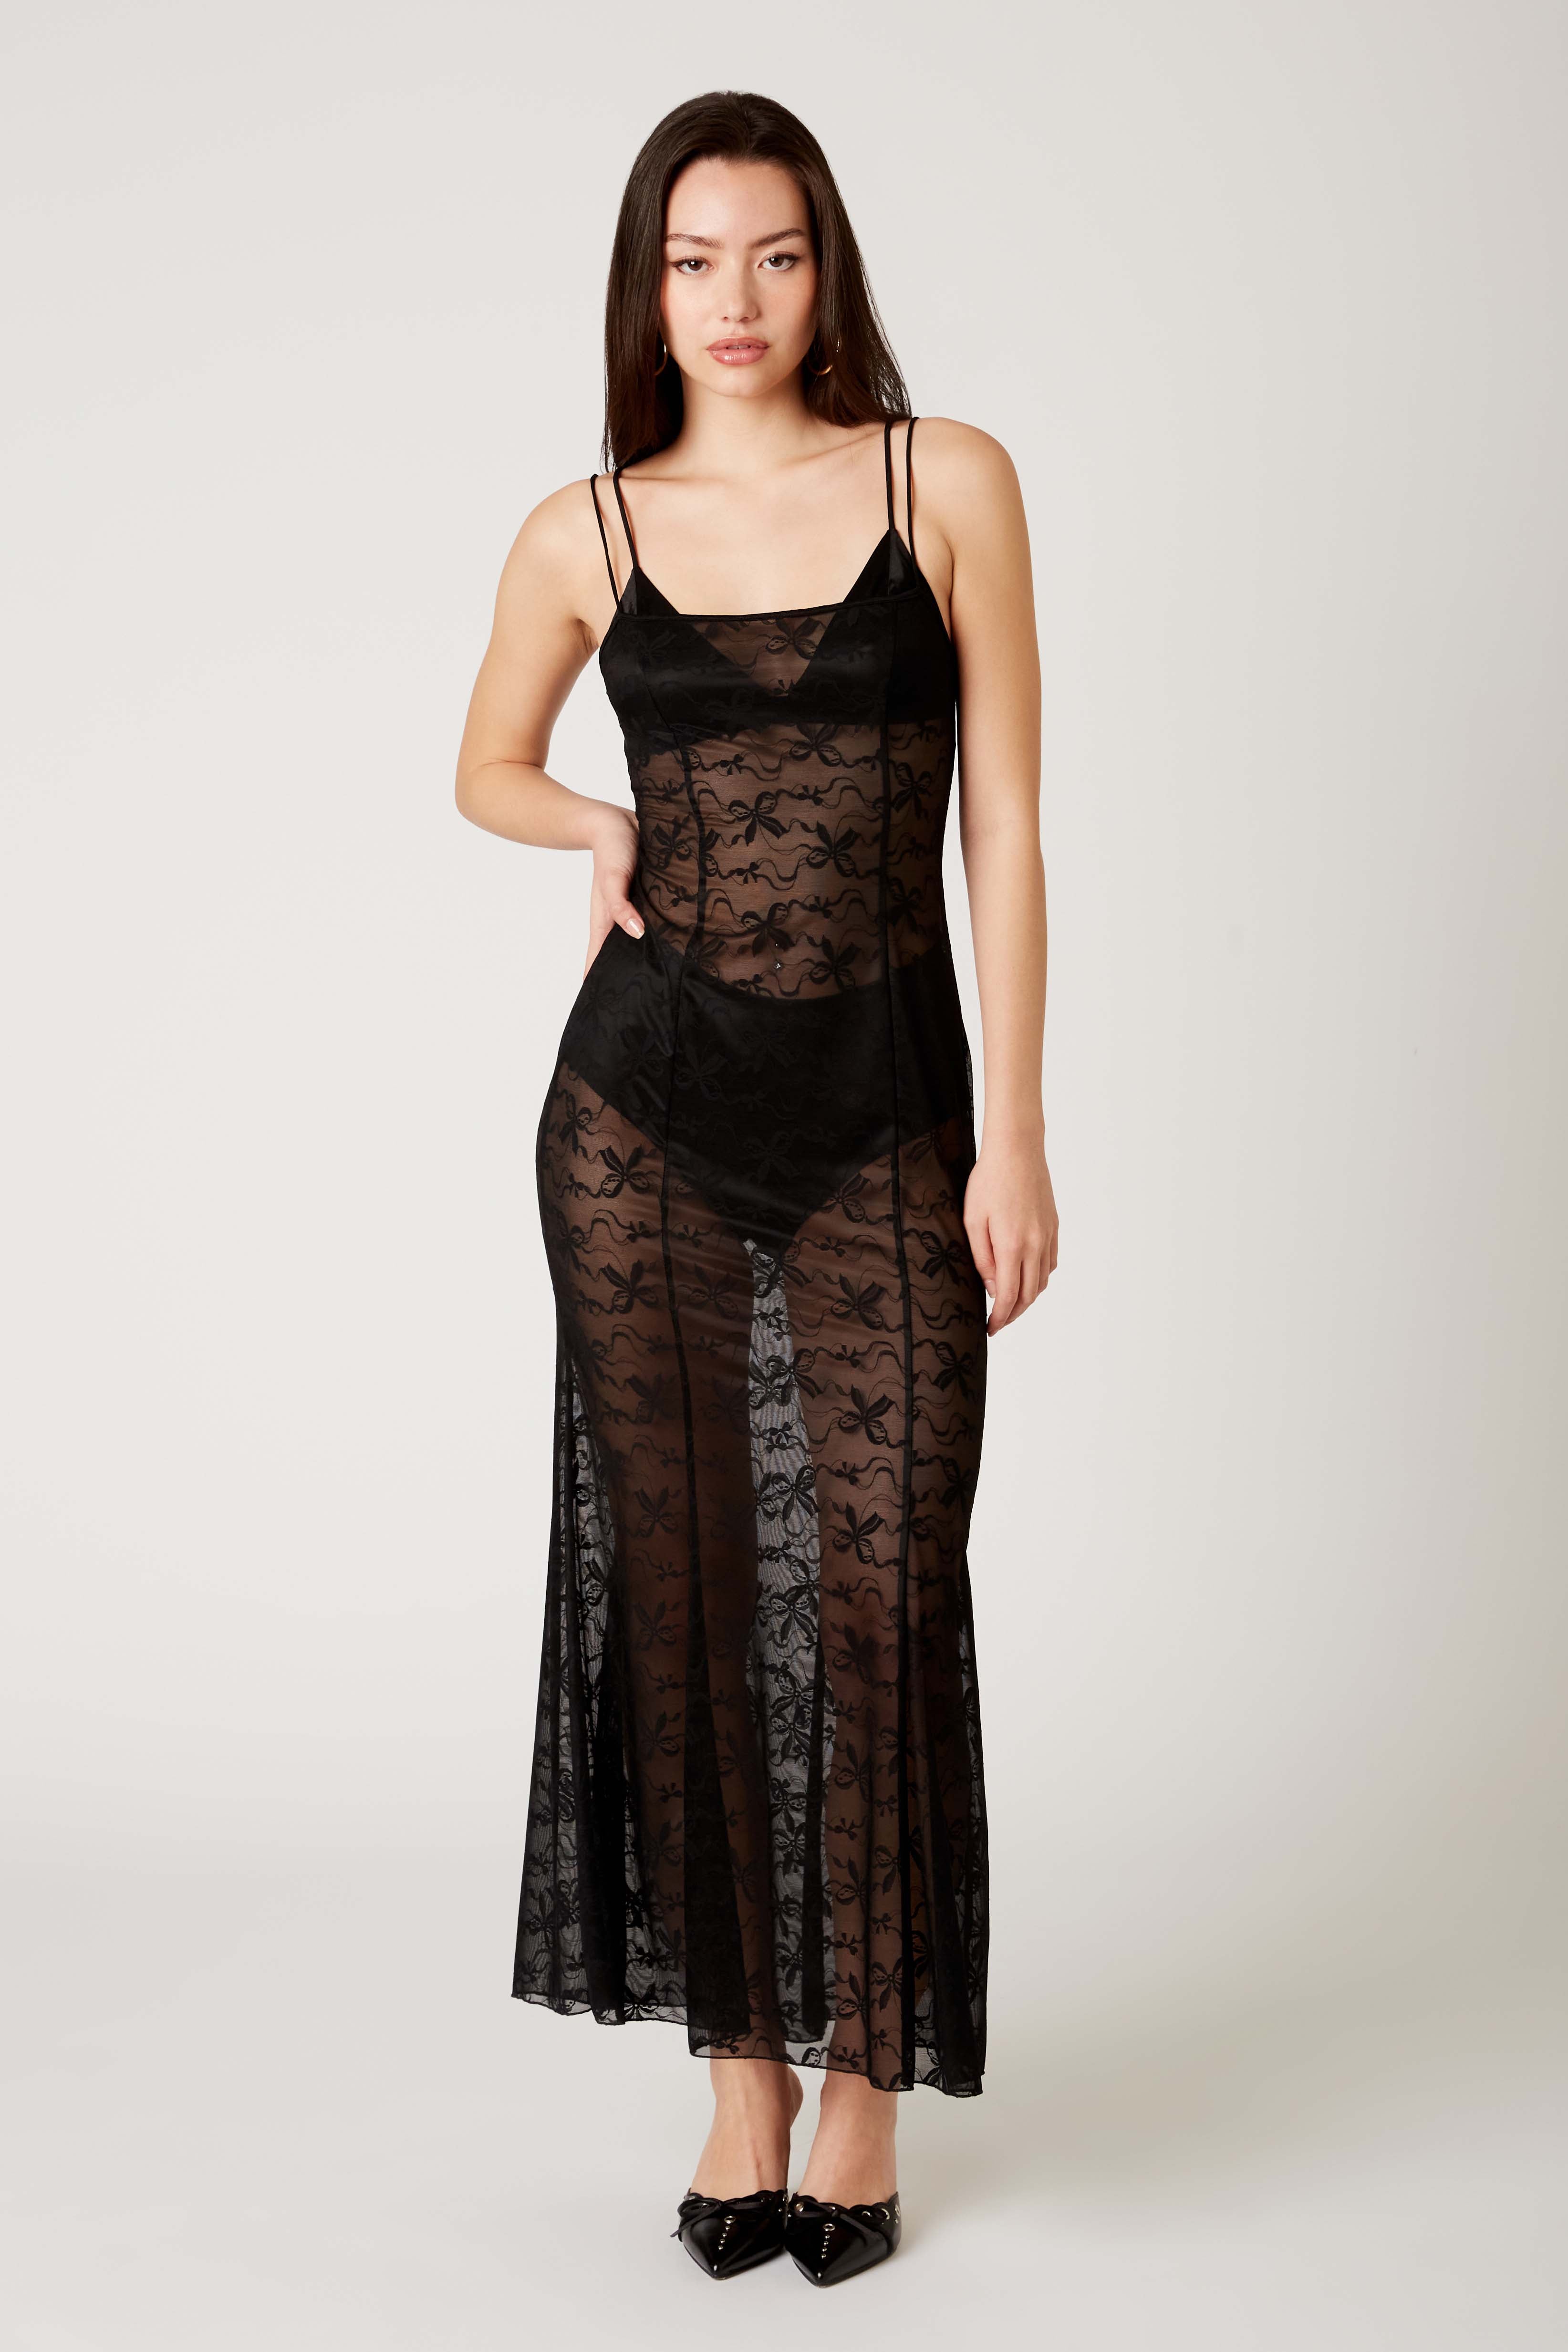 Lace Maxi Dress in black front view